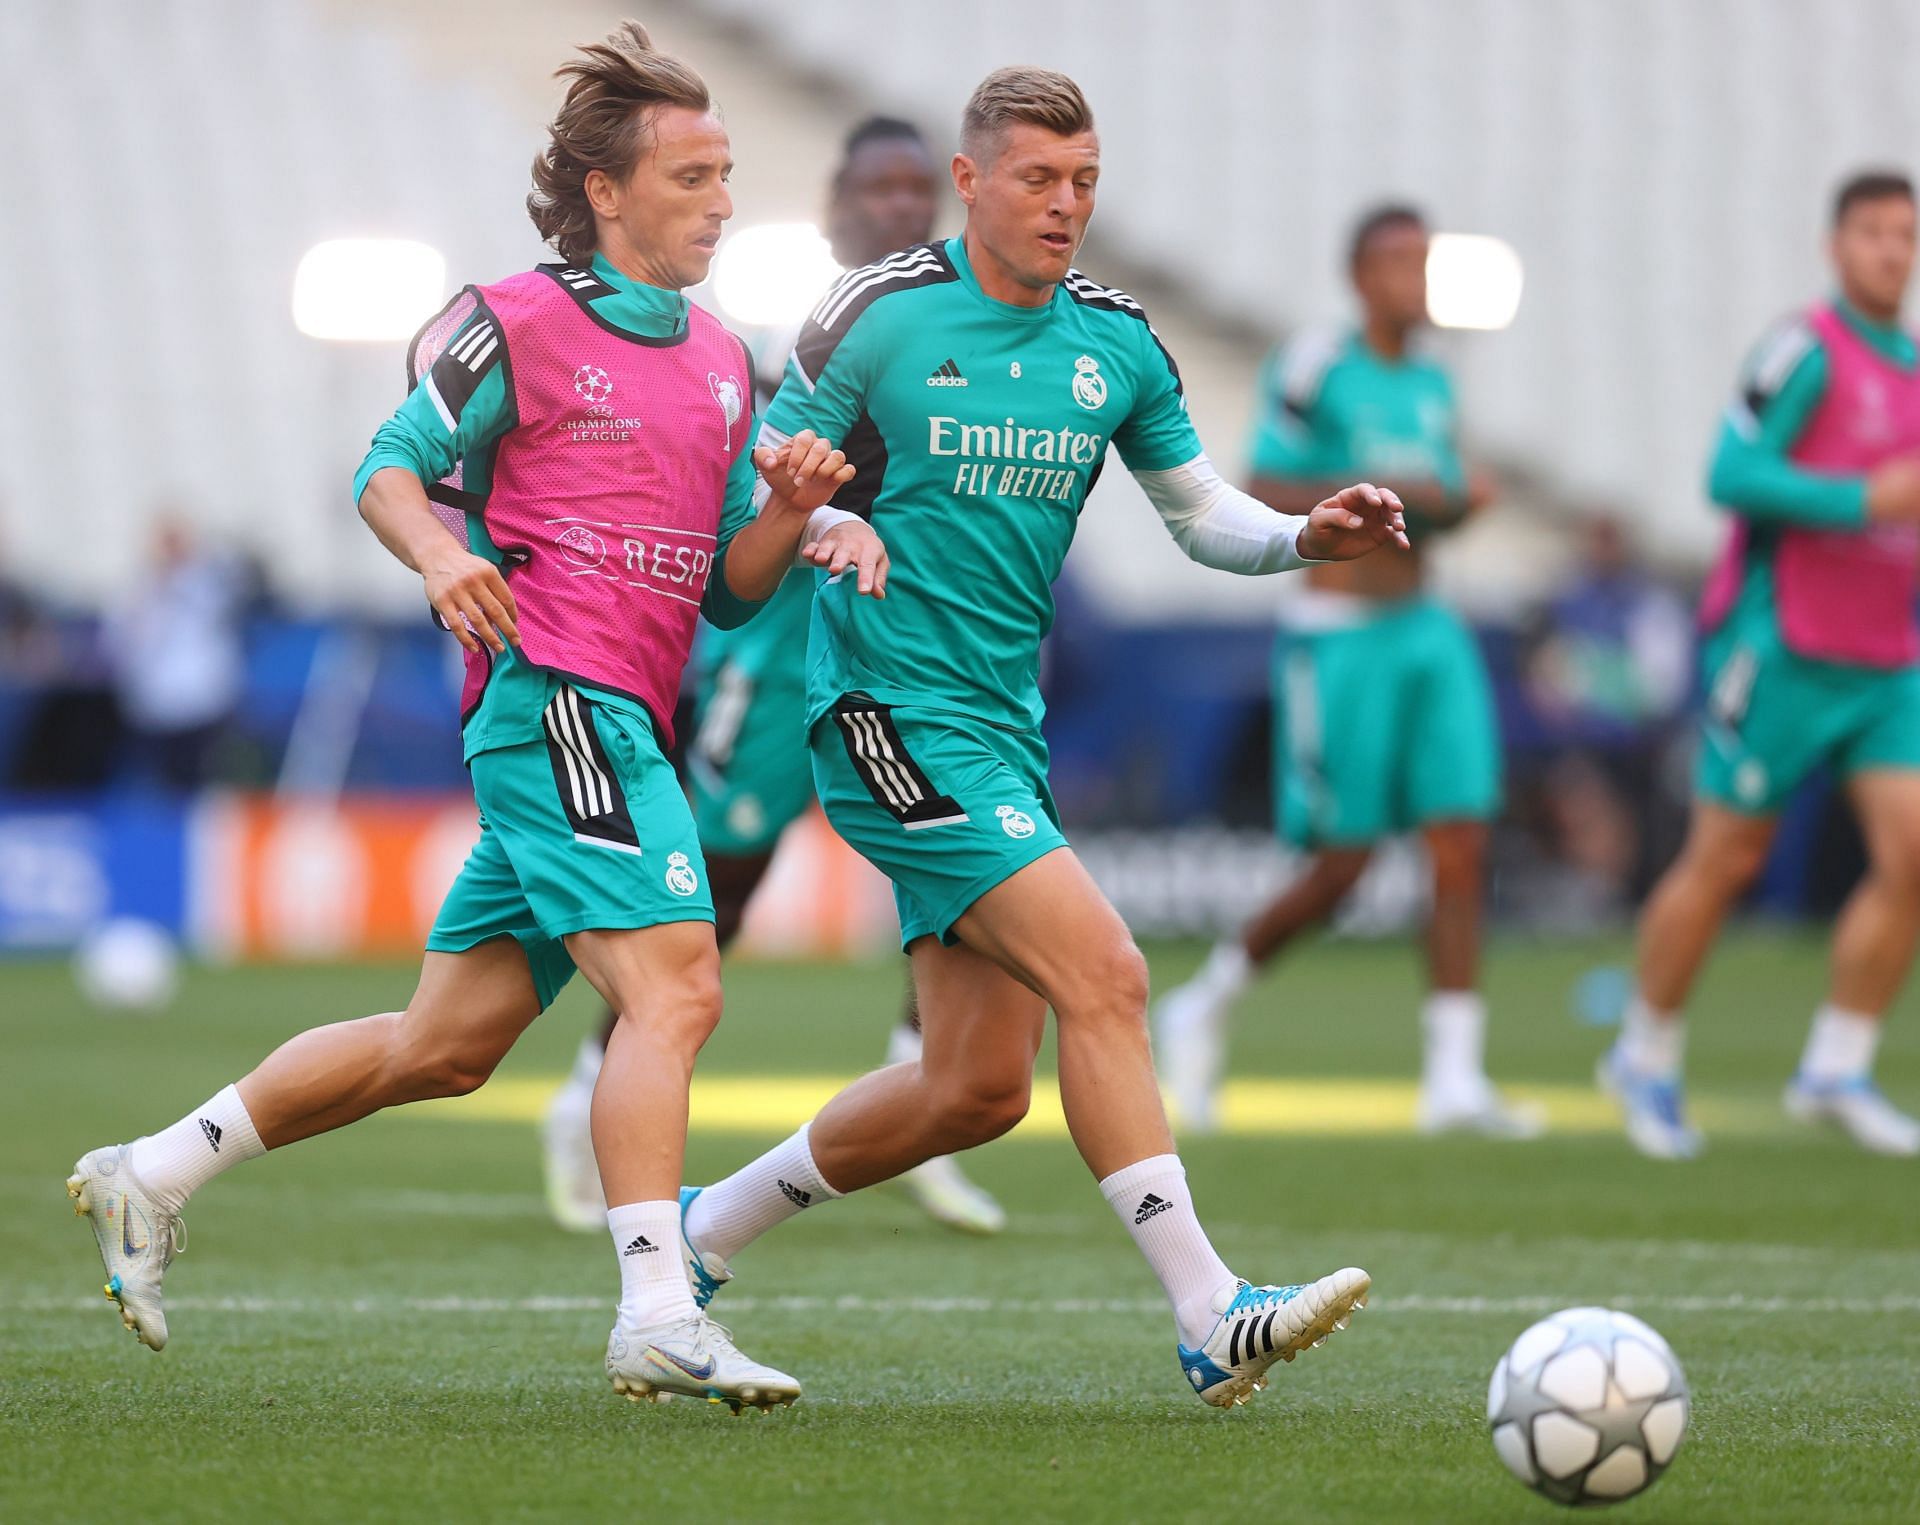 Toni Kroos (left) and Luka Modric have been outstanding for Ancelotti.